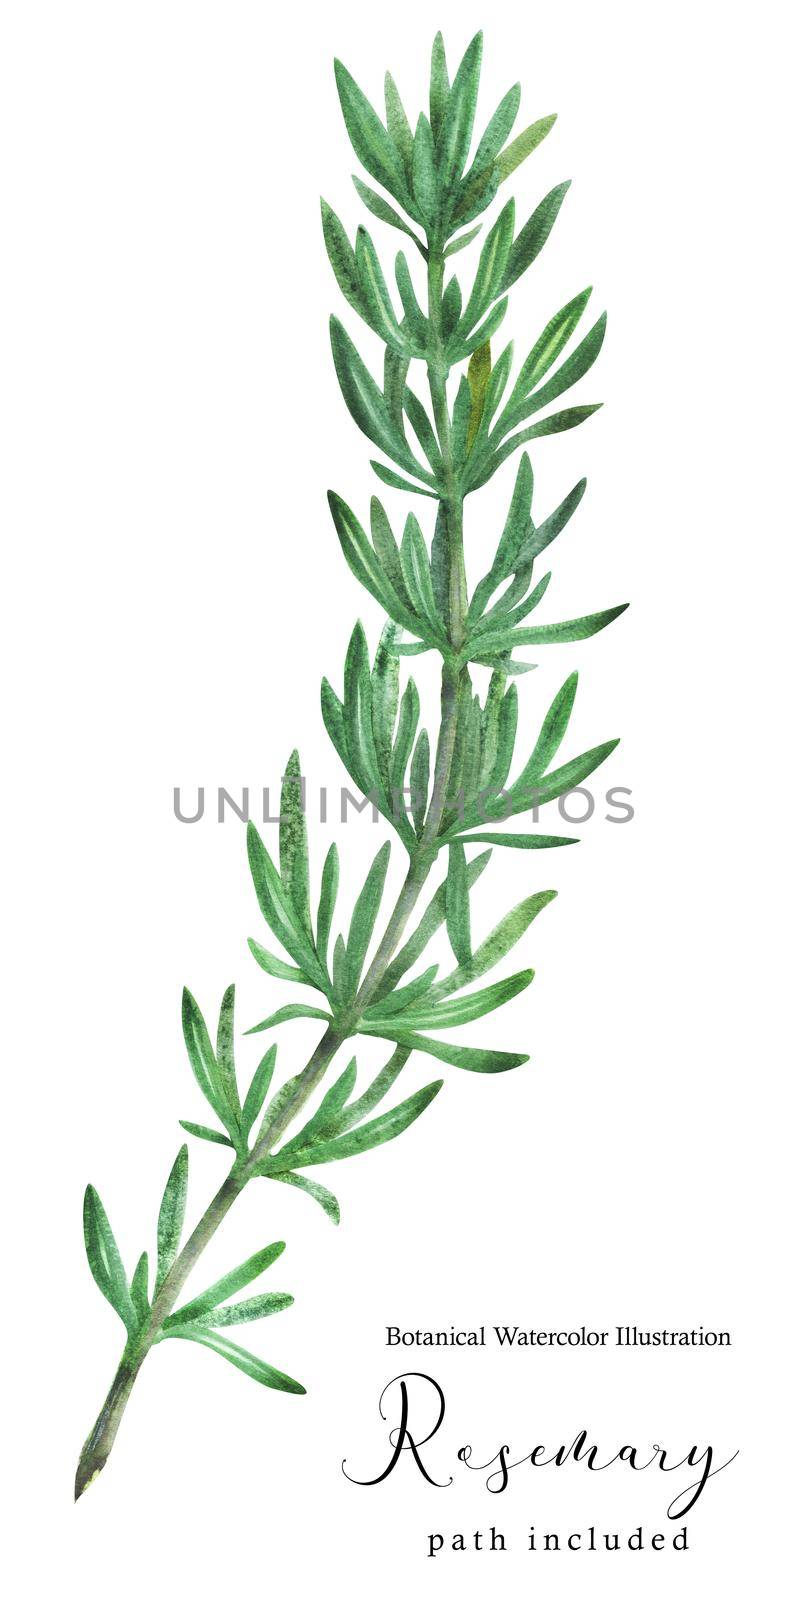 Rosemary green stem branch. Botanical watercolor illustration, path included